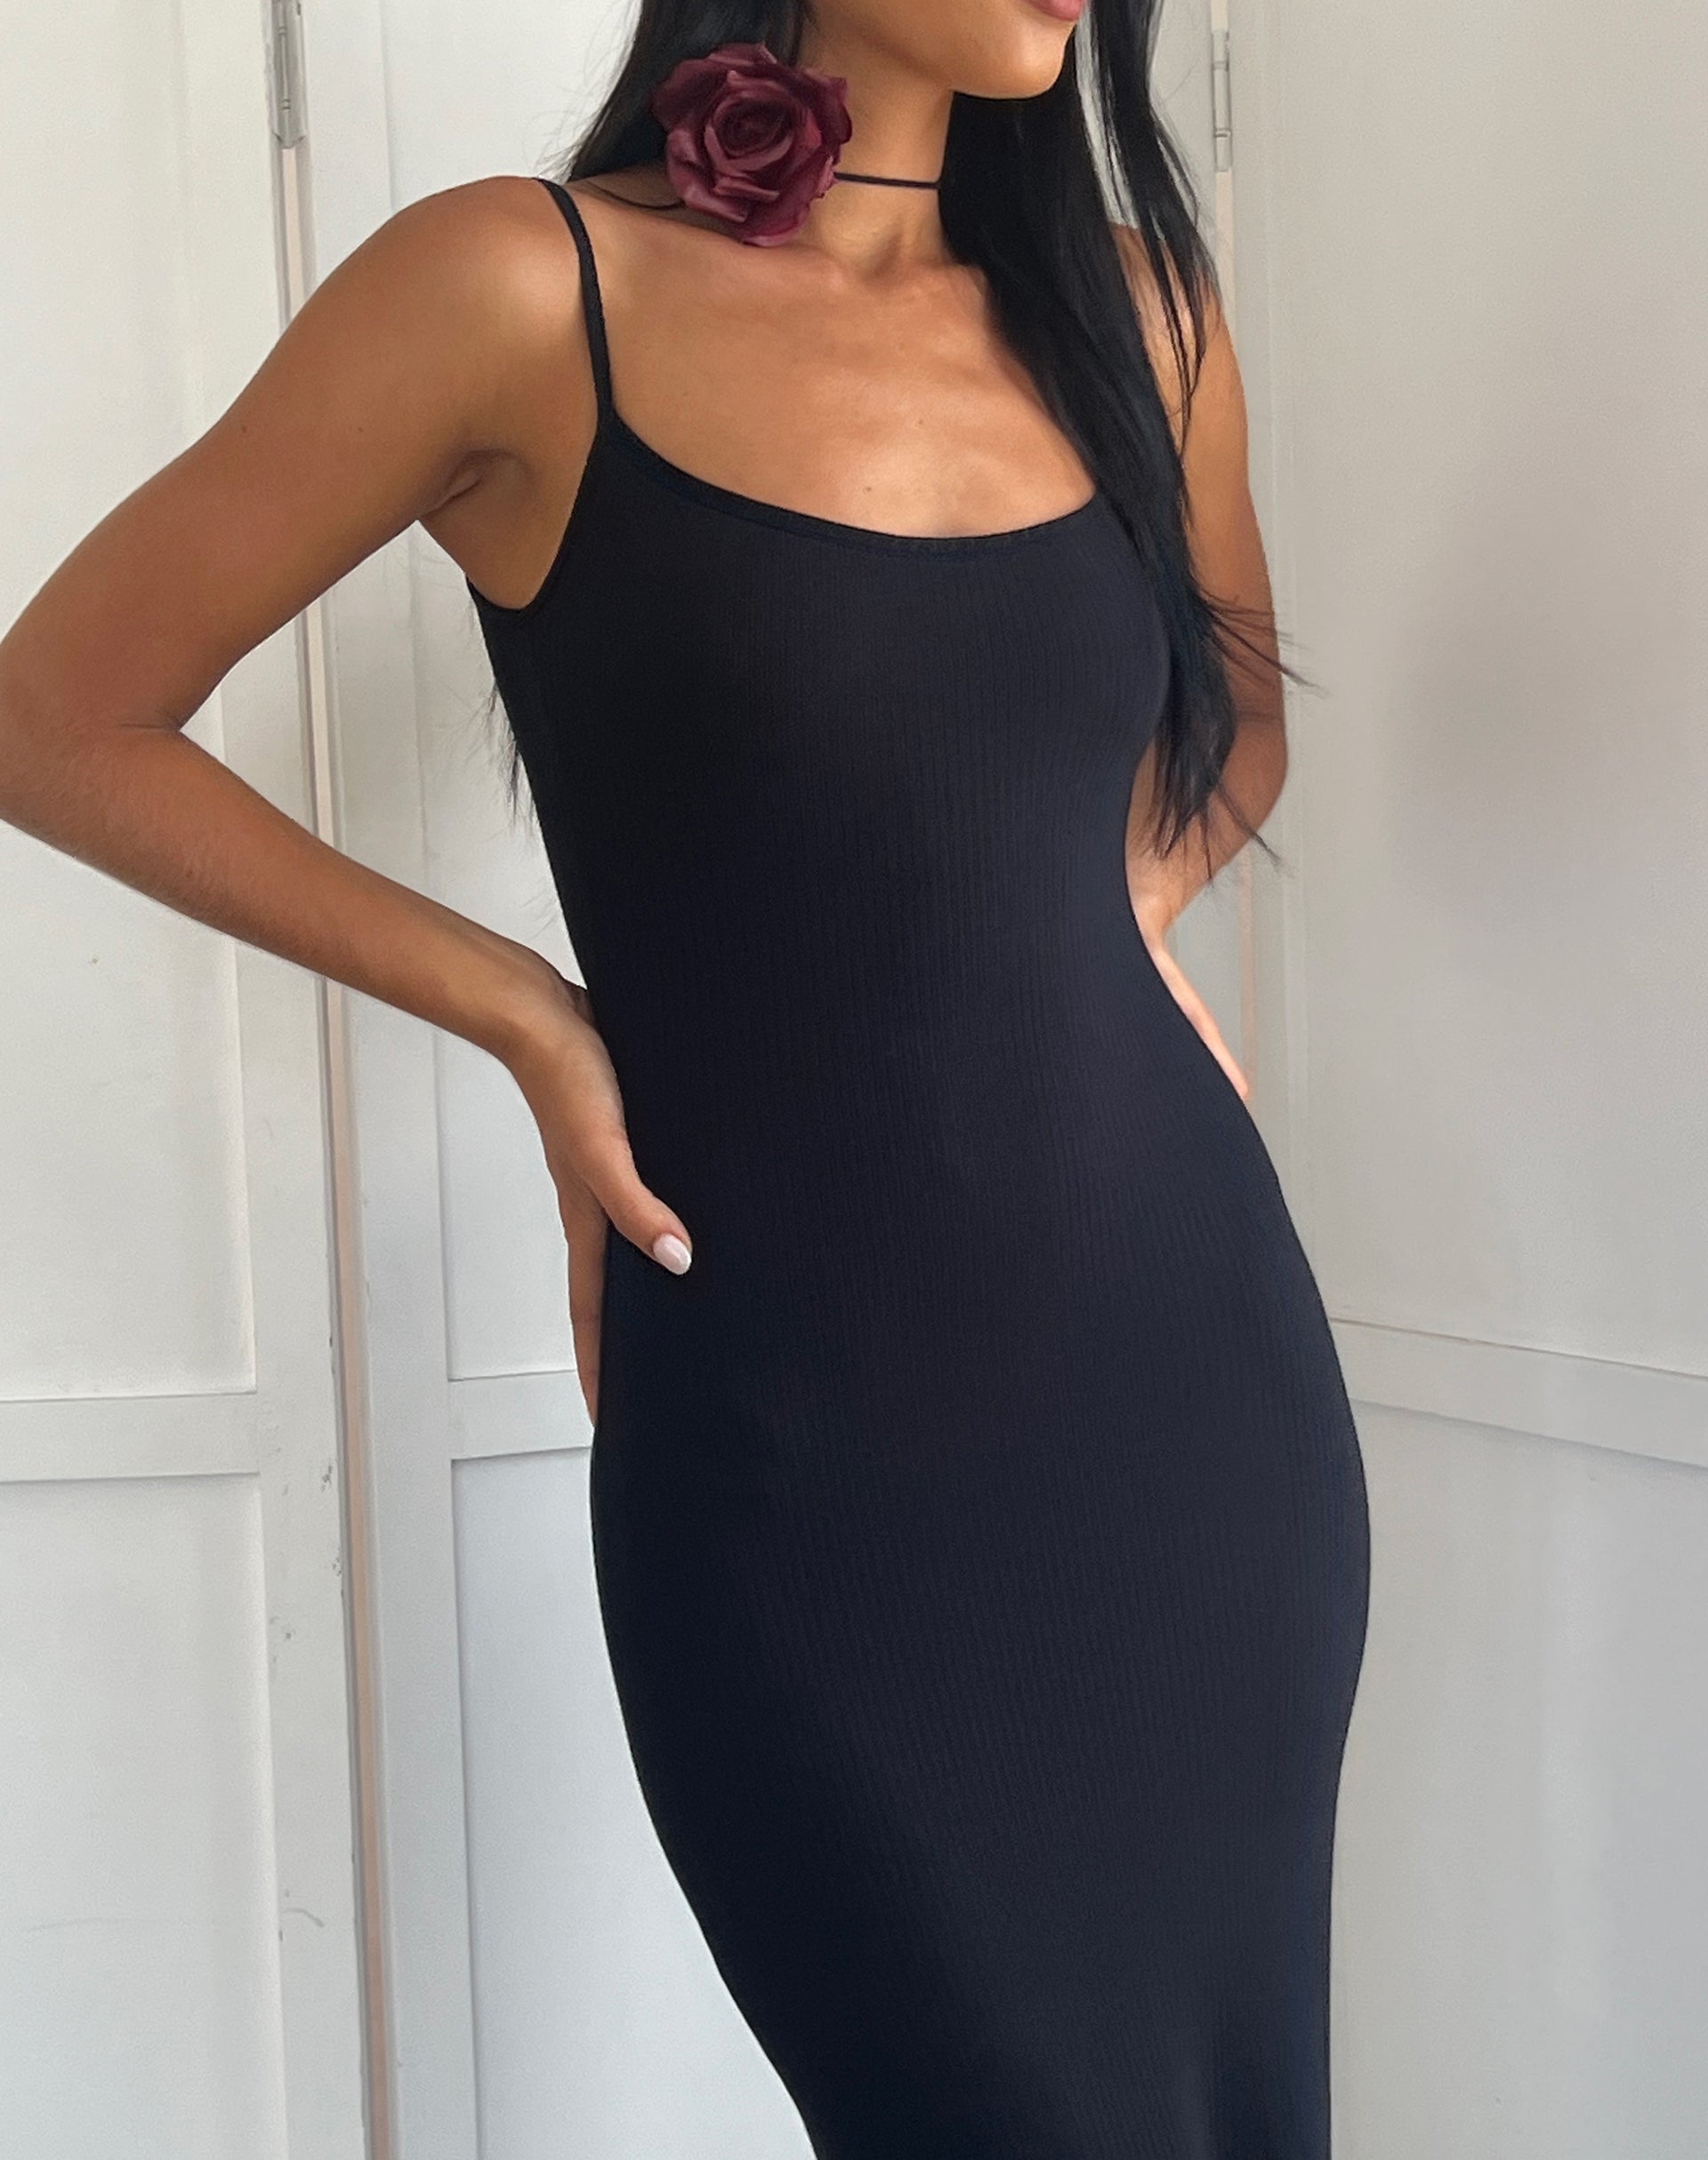 Buy Studiofit Black Cut Out Ribbed Dress from Westside